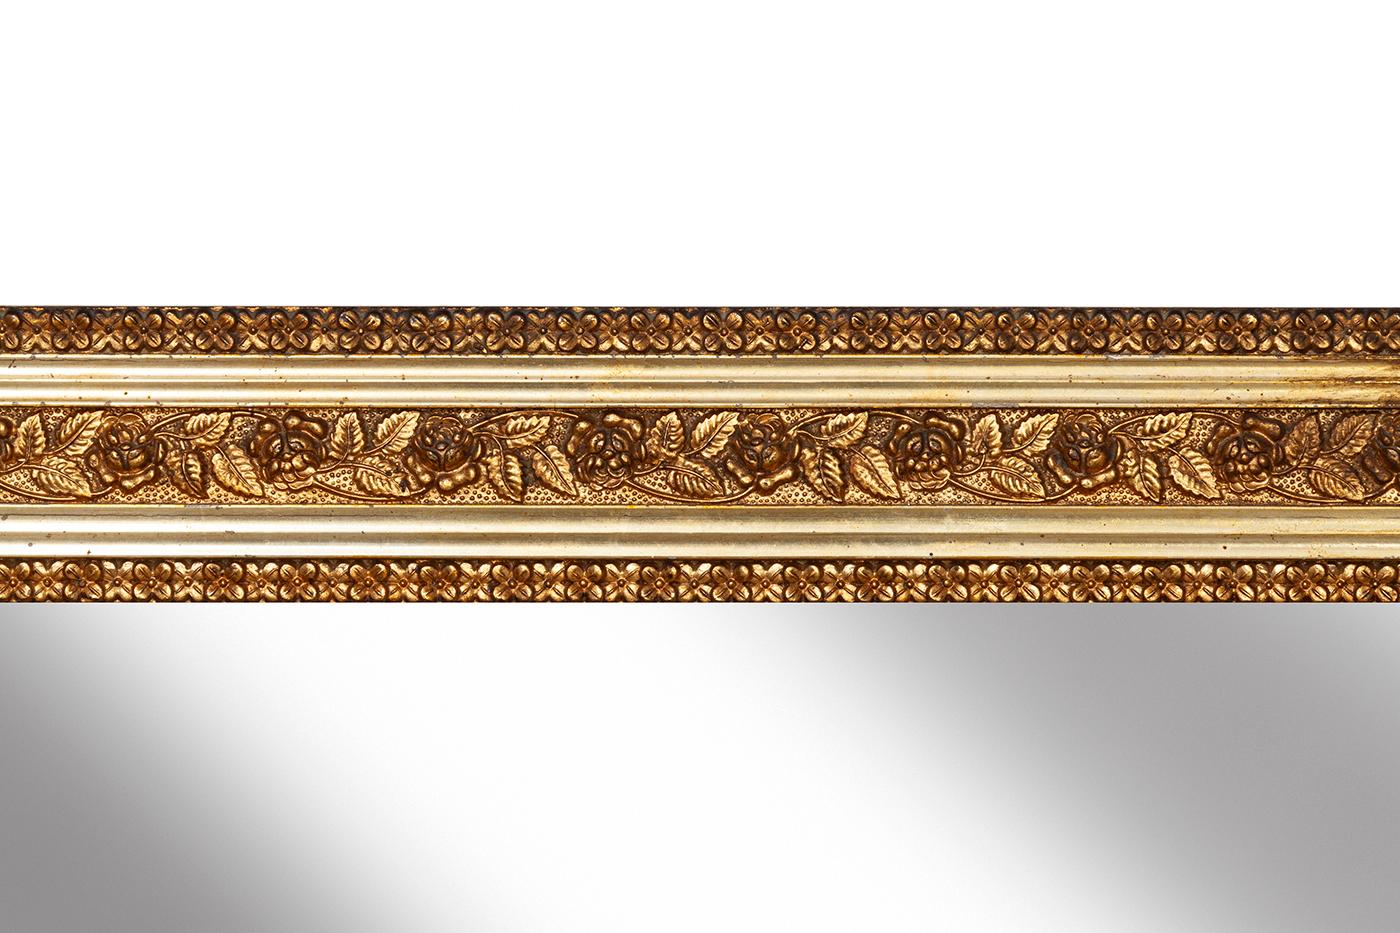 Late 19th Century/early 20th century Aesthetic Movement giltwood frame with gilt flower & leaf motif set between a small repeat pattern of crossed square on the inner & outer frame. Smooth surface with lemon/blonde gilt borders on each side of the